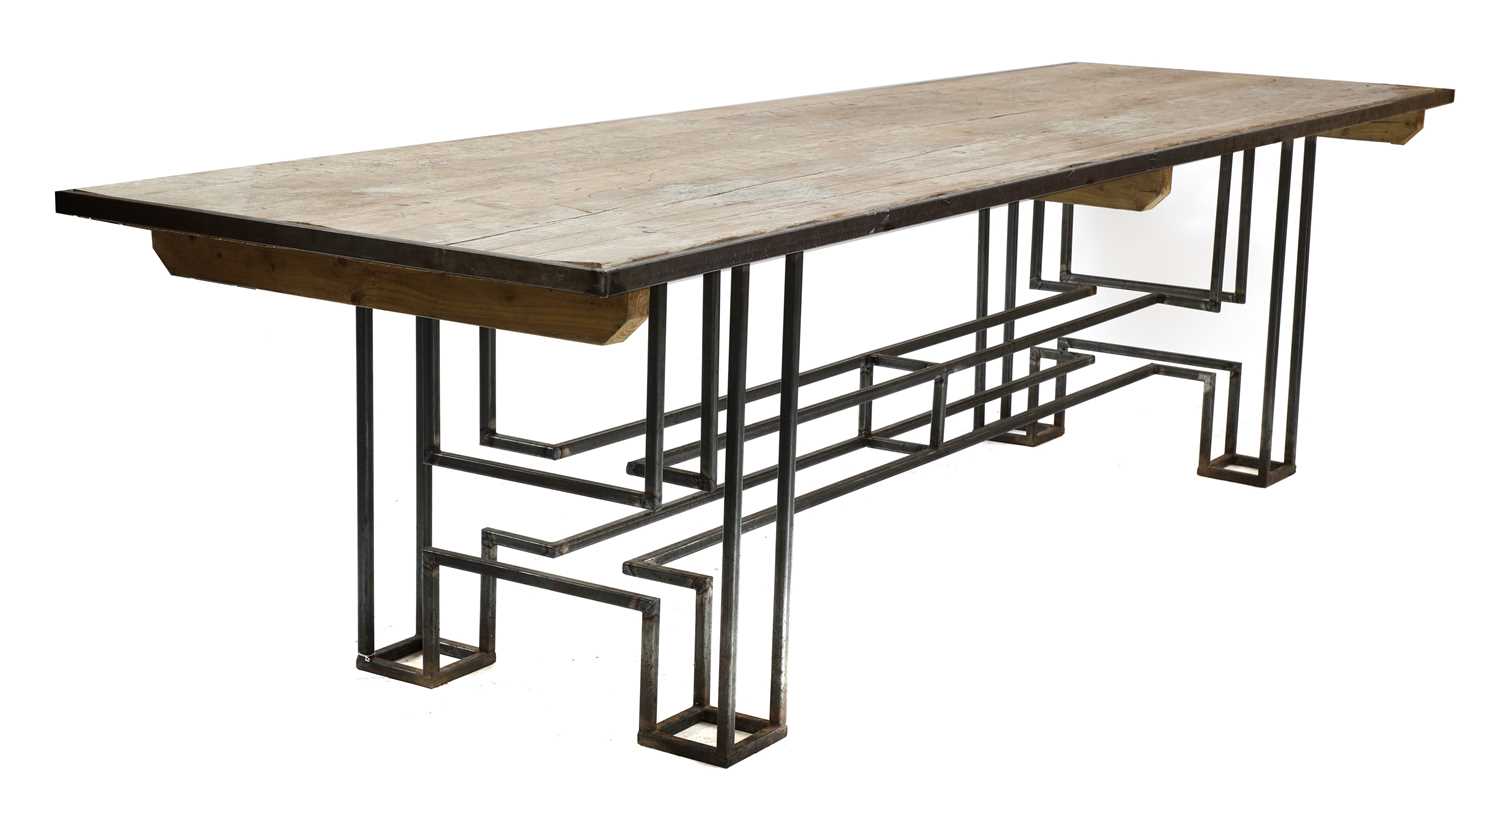 Lot 433 - A large pine and steel industrial refectory table